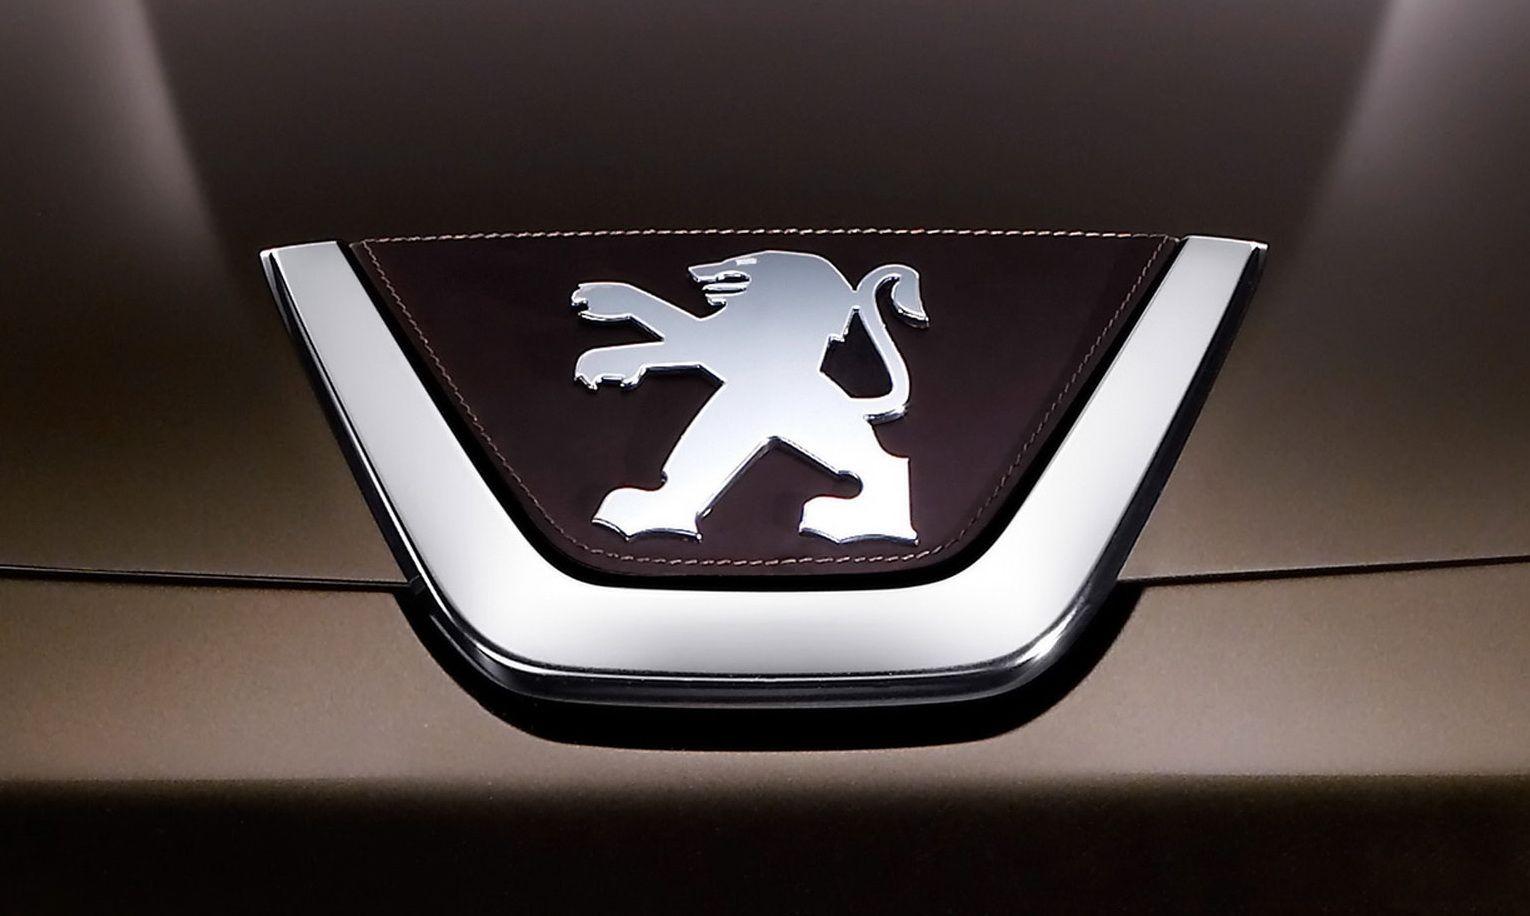 What Are Lions Car Logo - Peugeot Logo, Peugeot Car Symbol Meaning and History. Car Brand